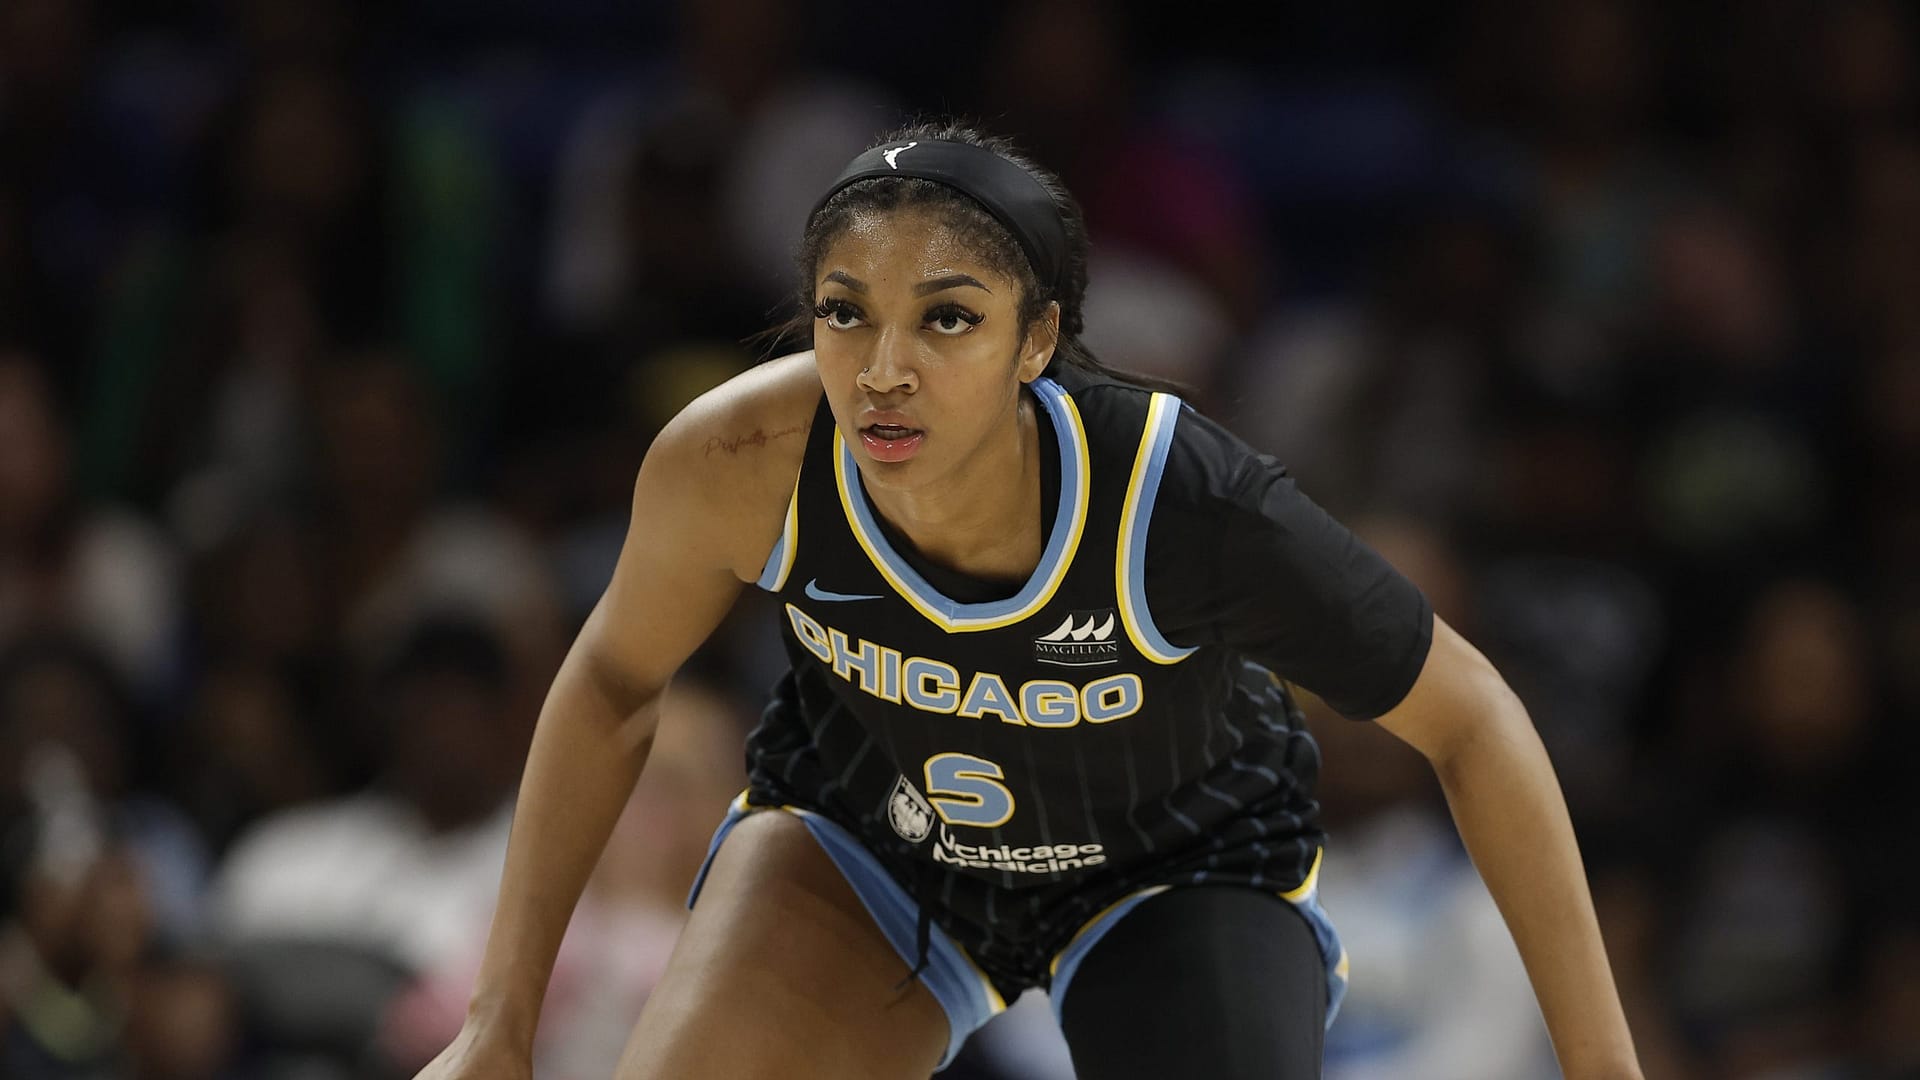 Want to learn how to bet on WNBA player props? Check out our tips, strategy and expert advice for WNBA player prop betting... Our expert dives into the best WNBA bets today, including WNBA player prop picks for Nneka Ogwumike and Angel Reese...